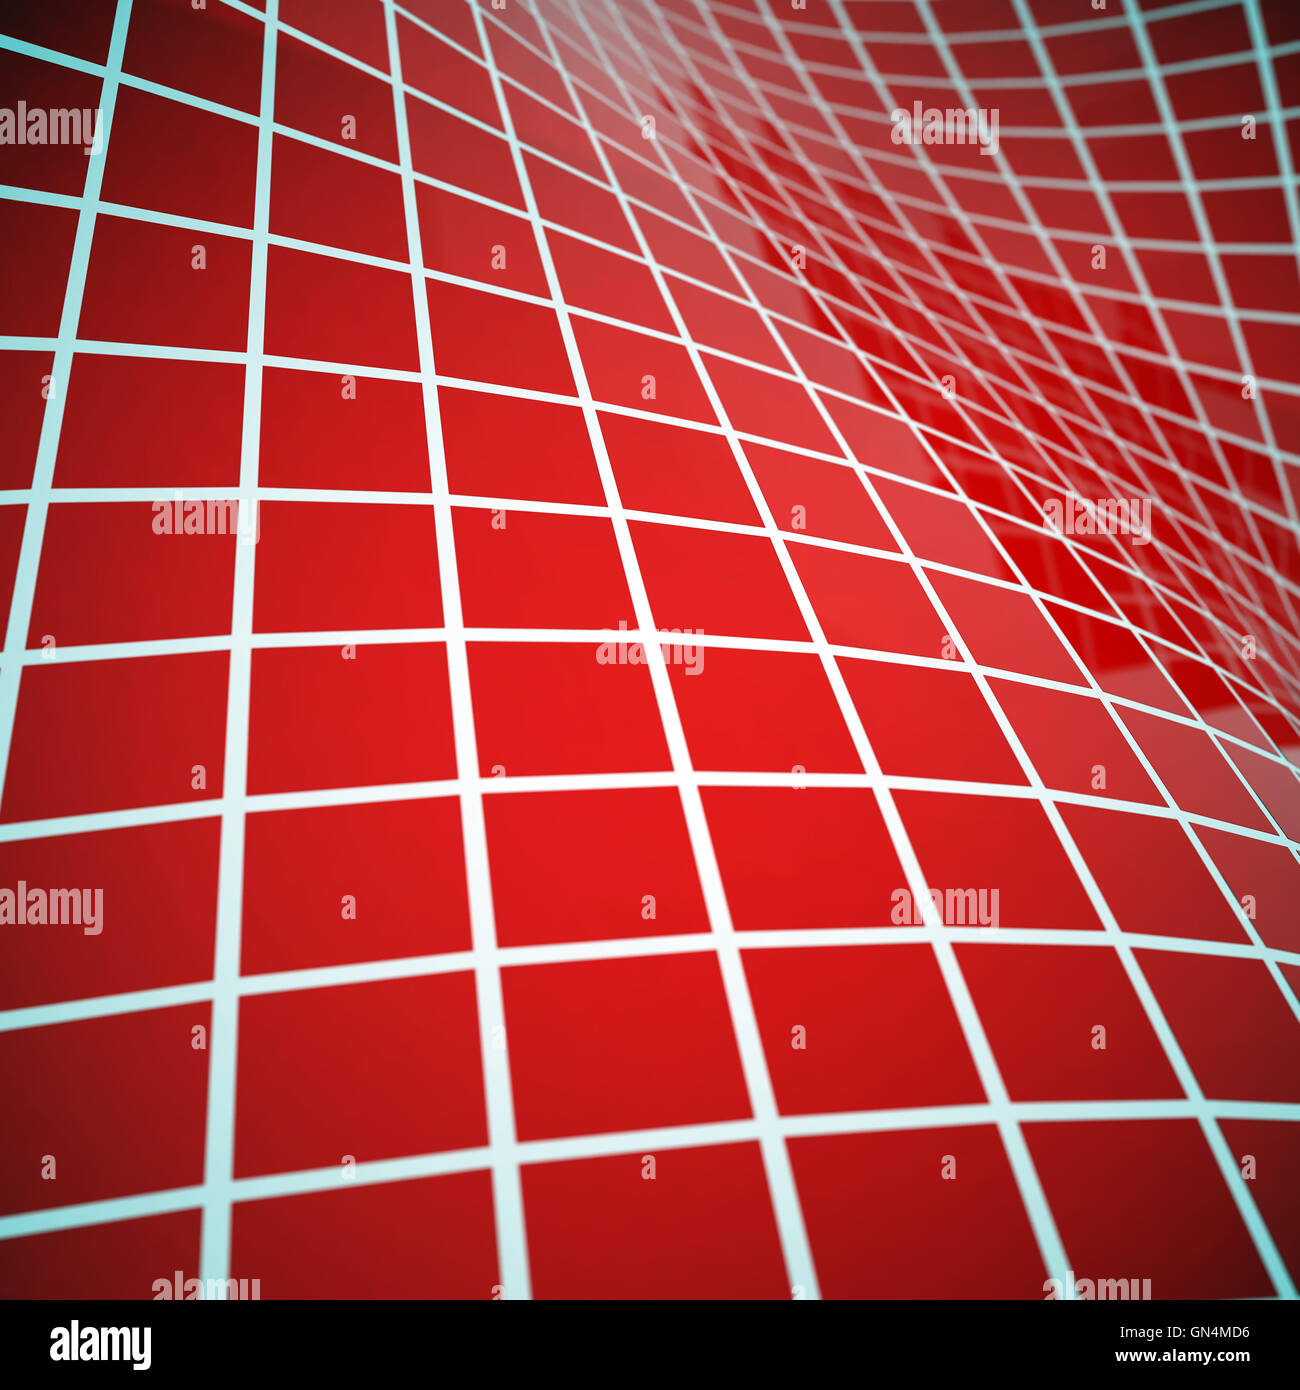 Abstract wavy pattern from red blocks Stock Photo